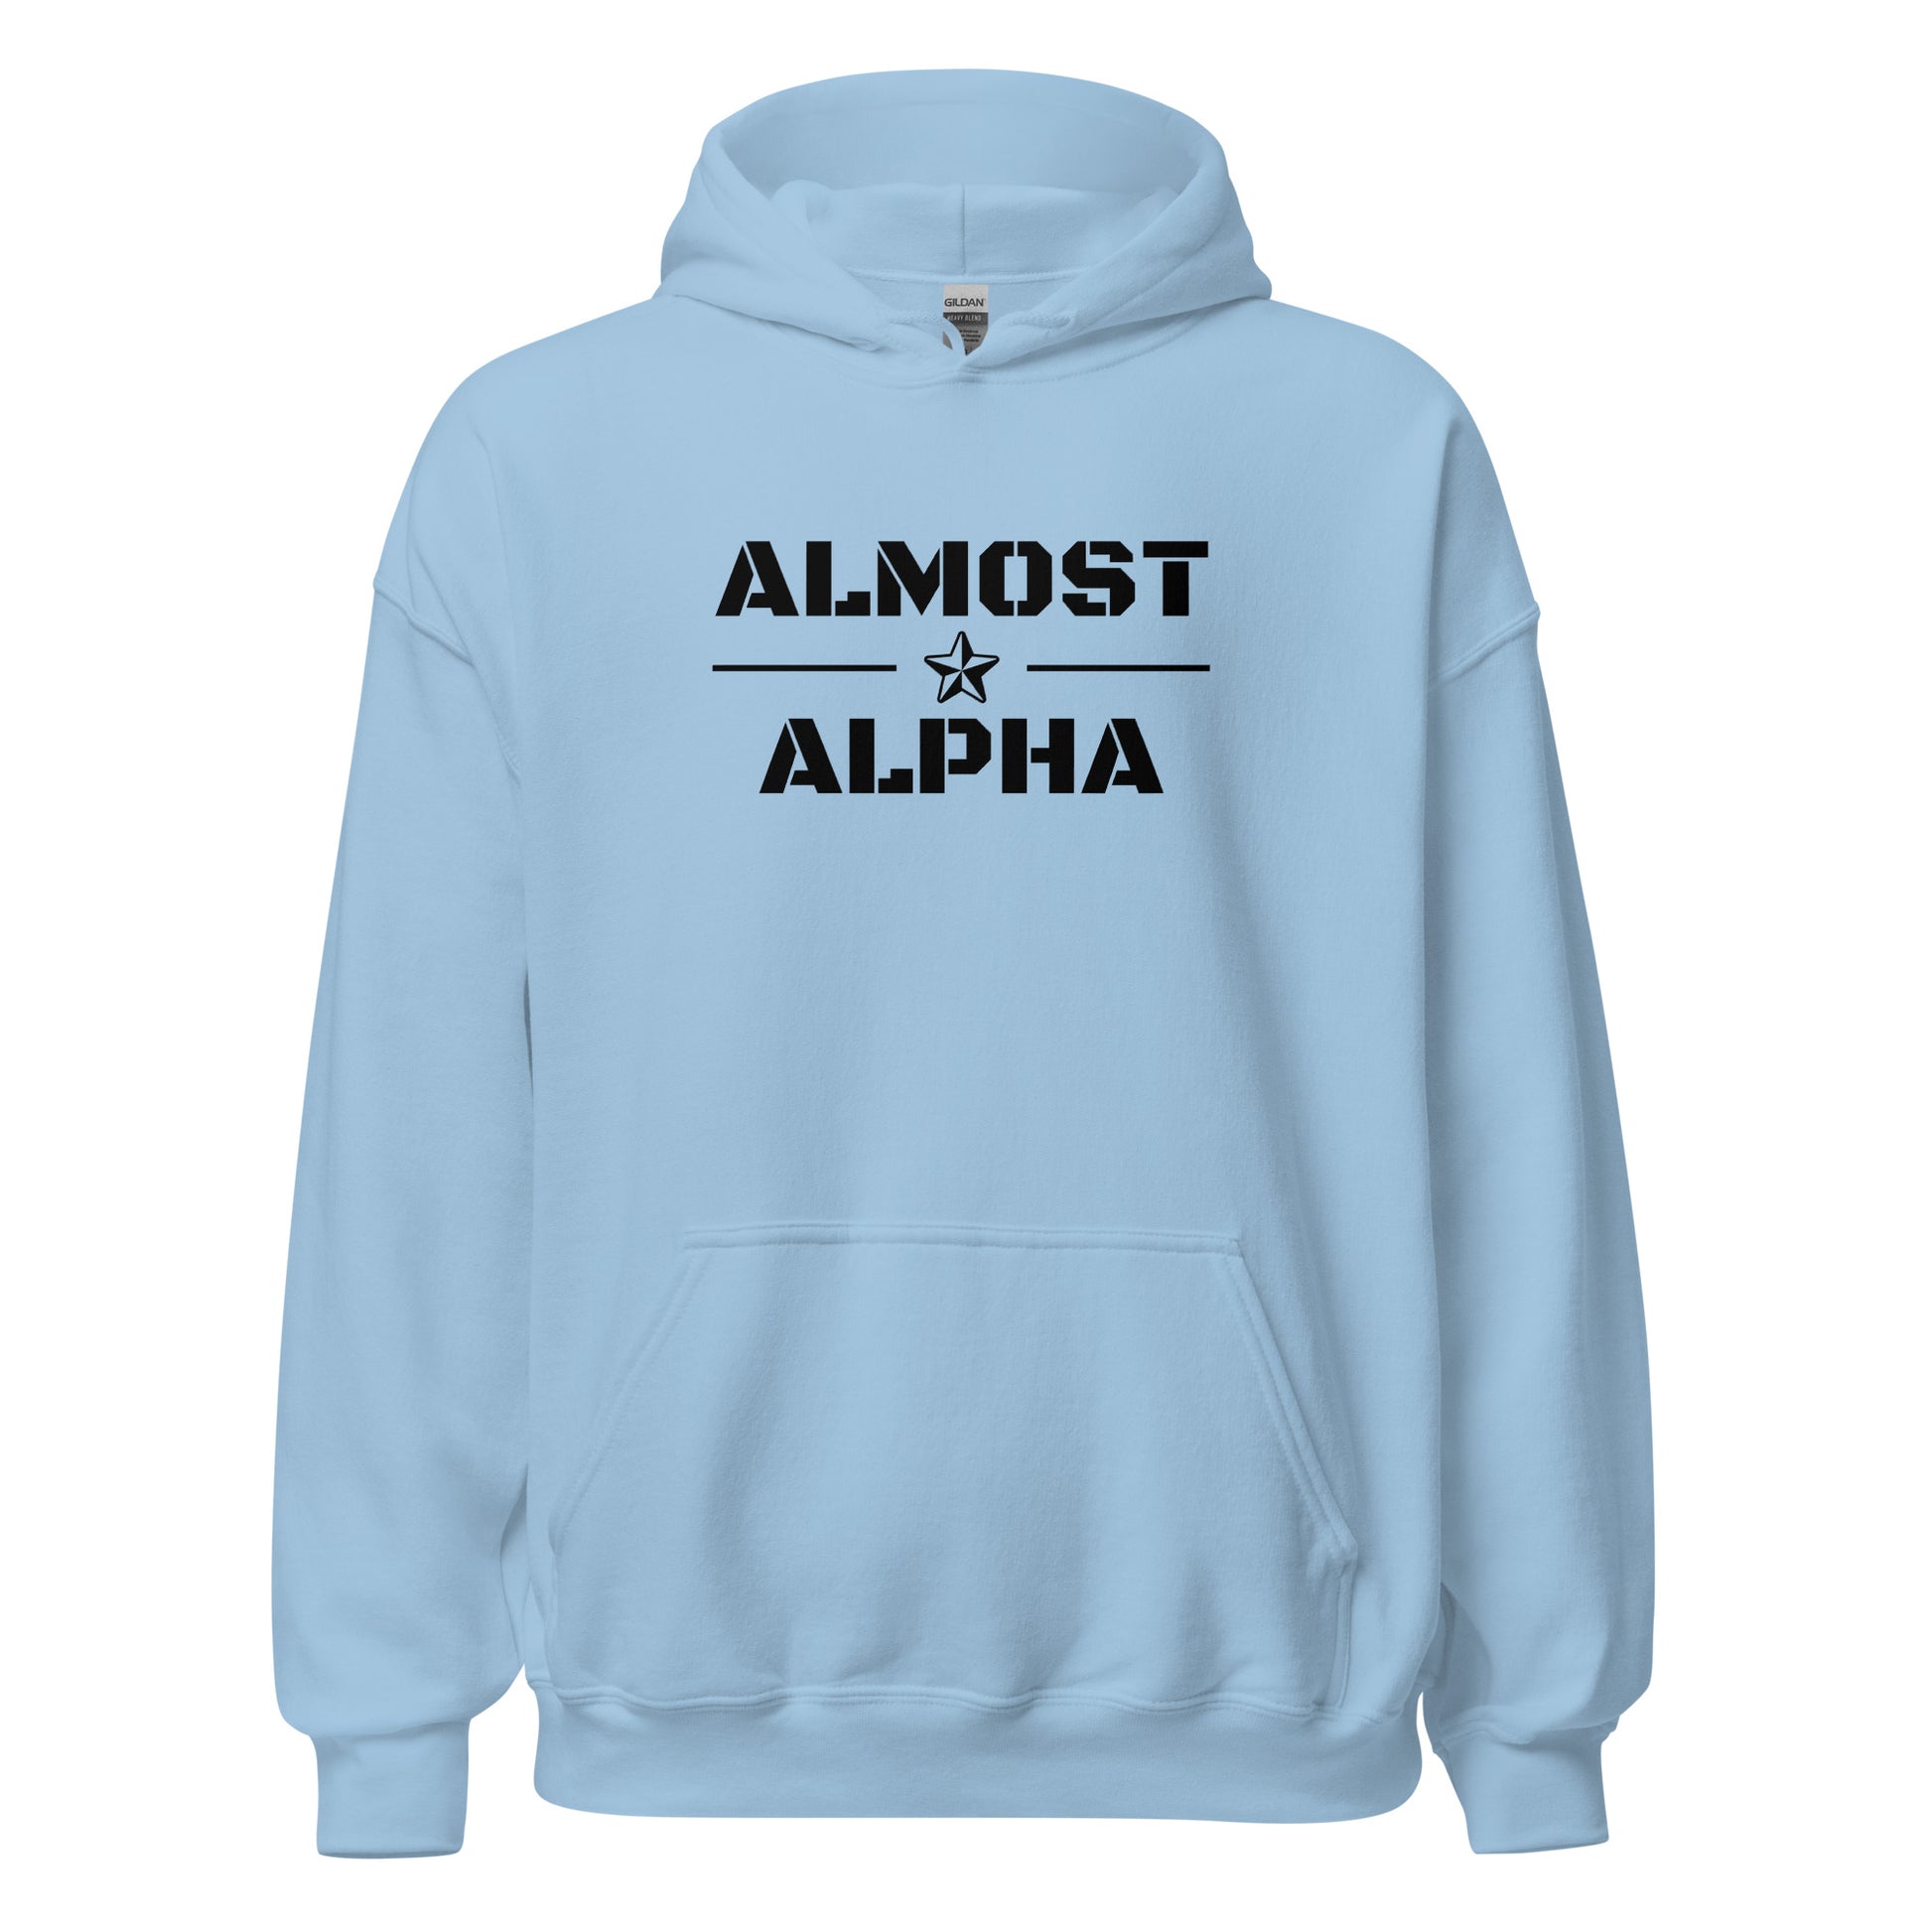 Almost Alpha Hoodie in Light Blue